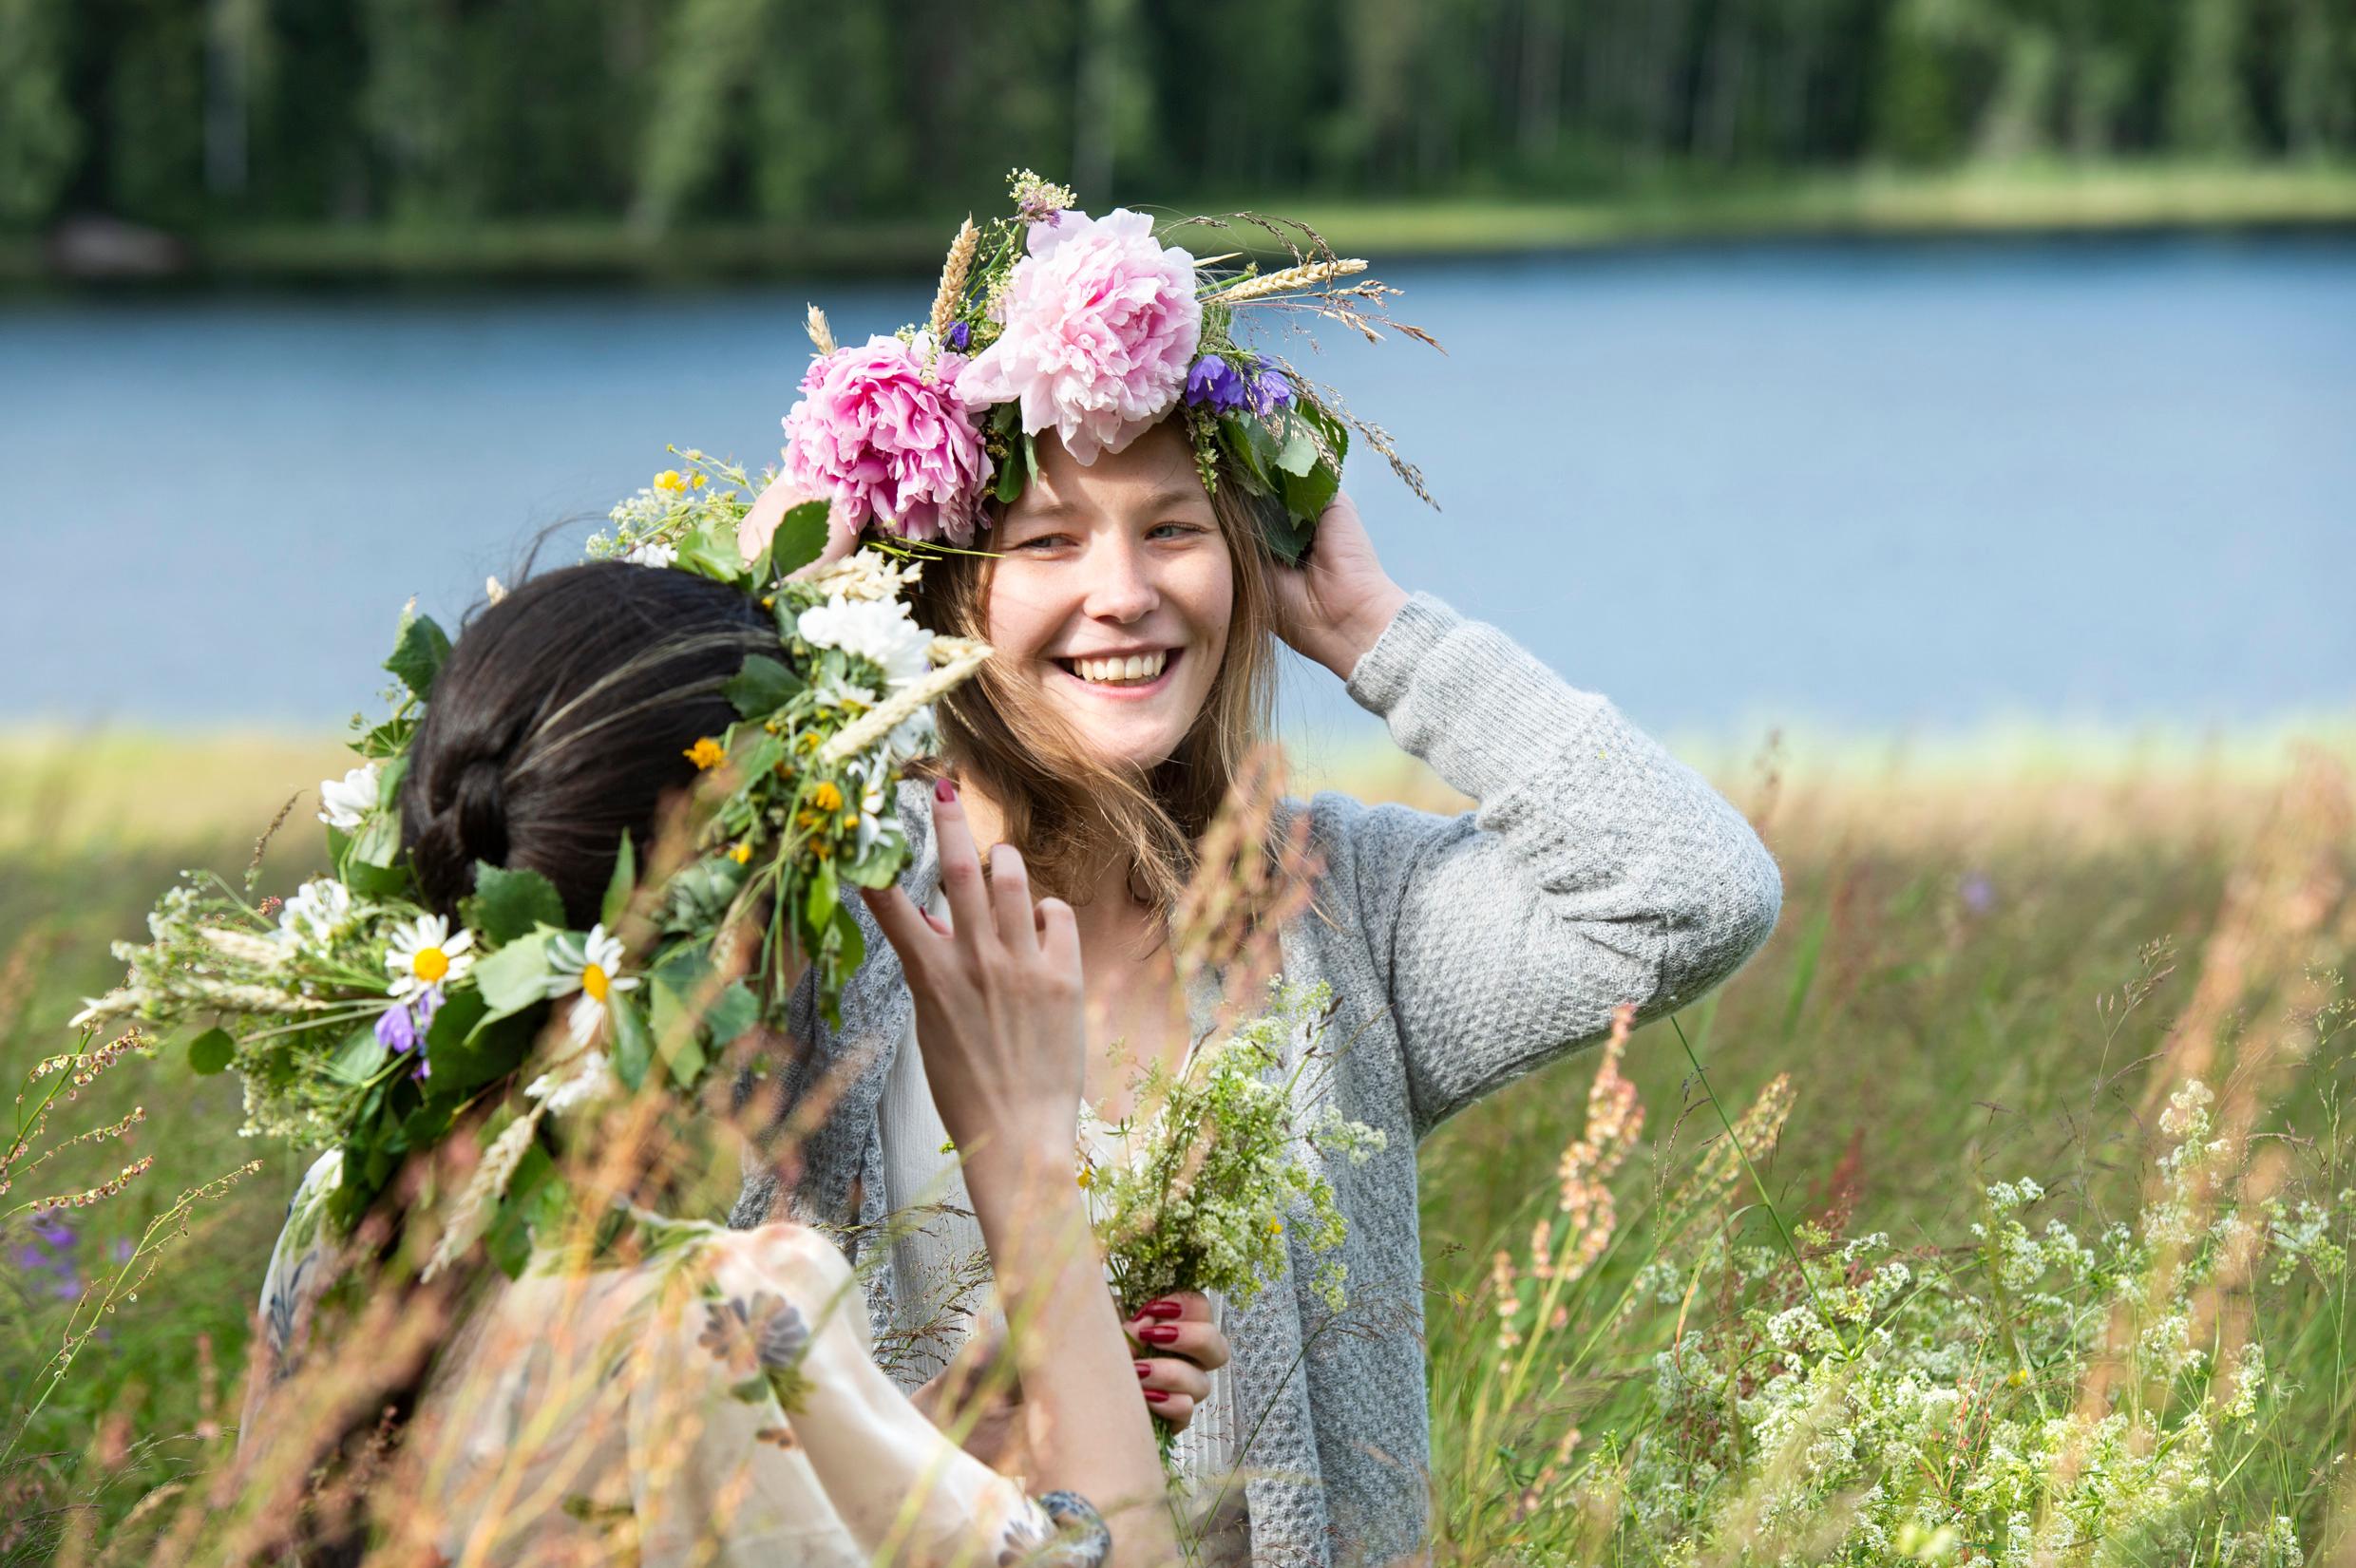 Two girls with Midsummer wreaths on their heads.